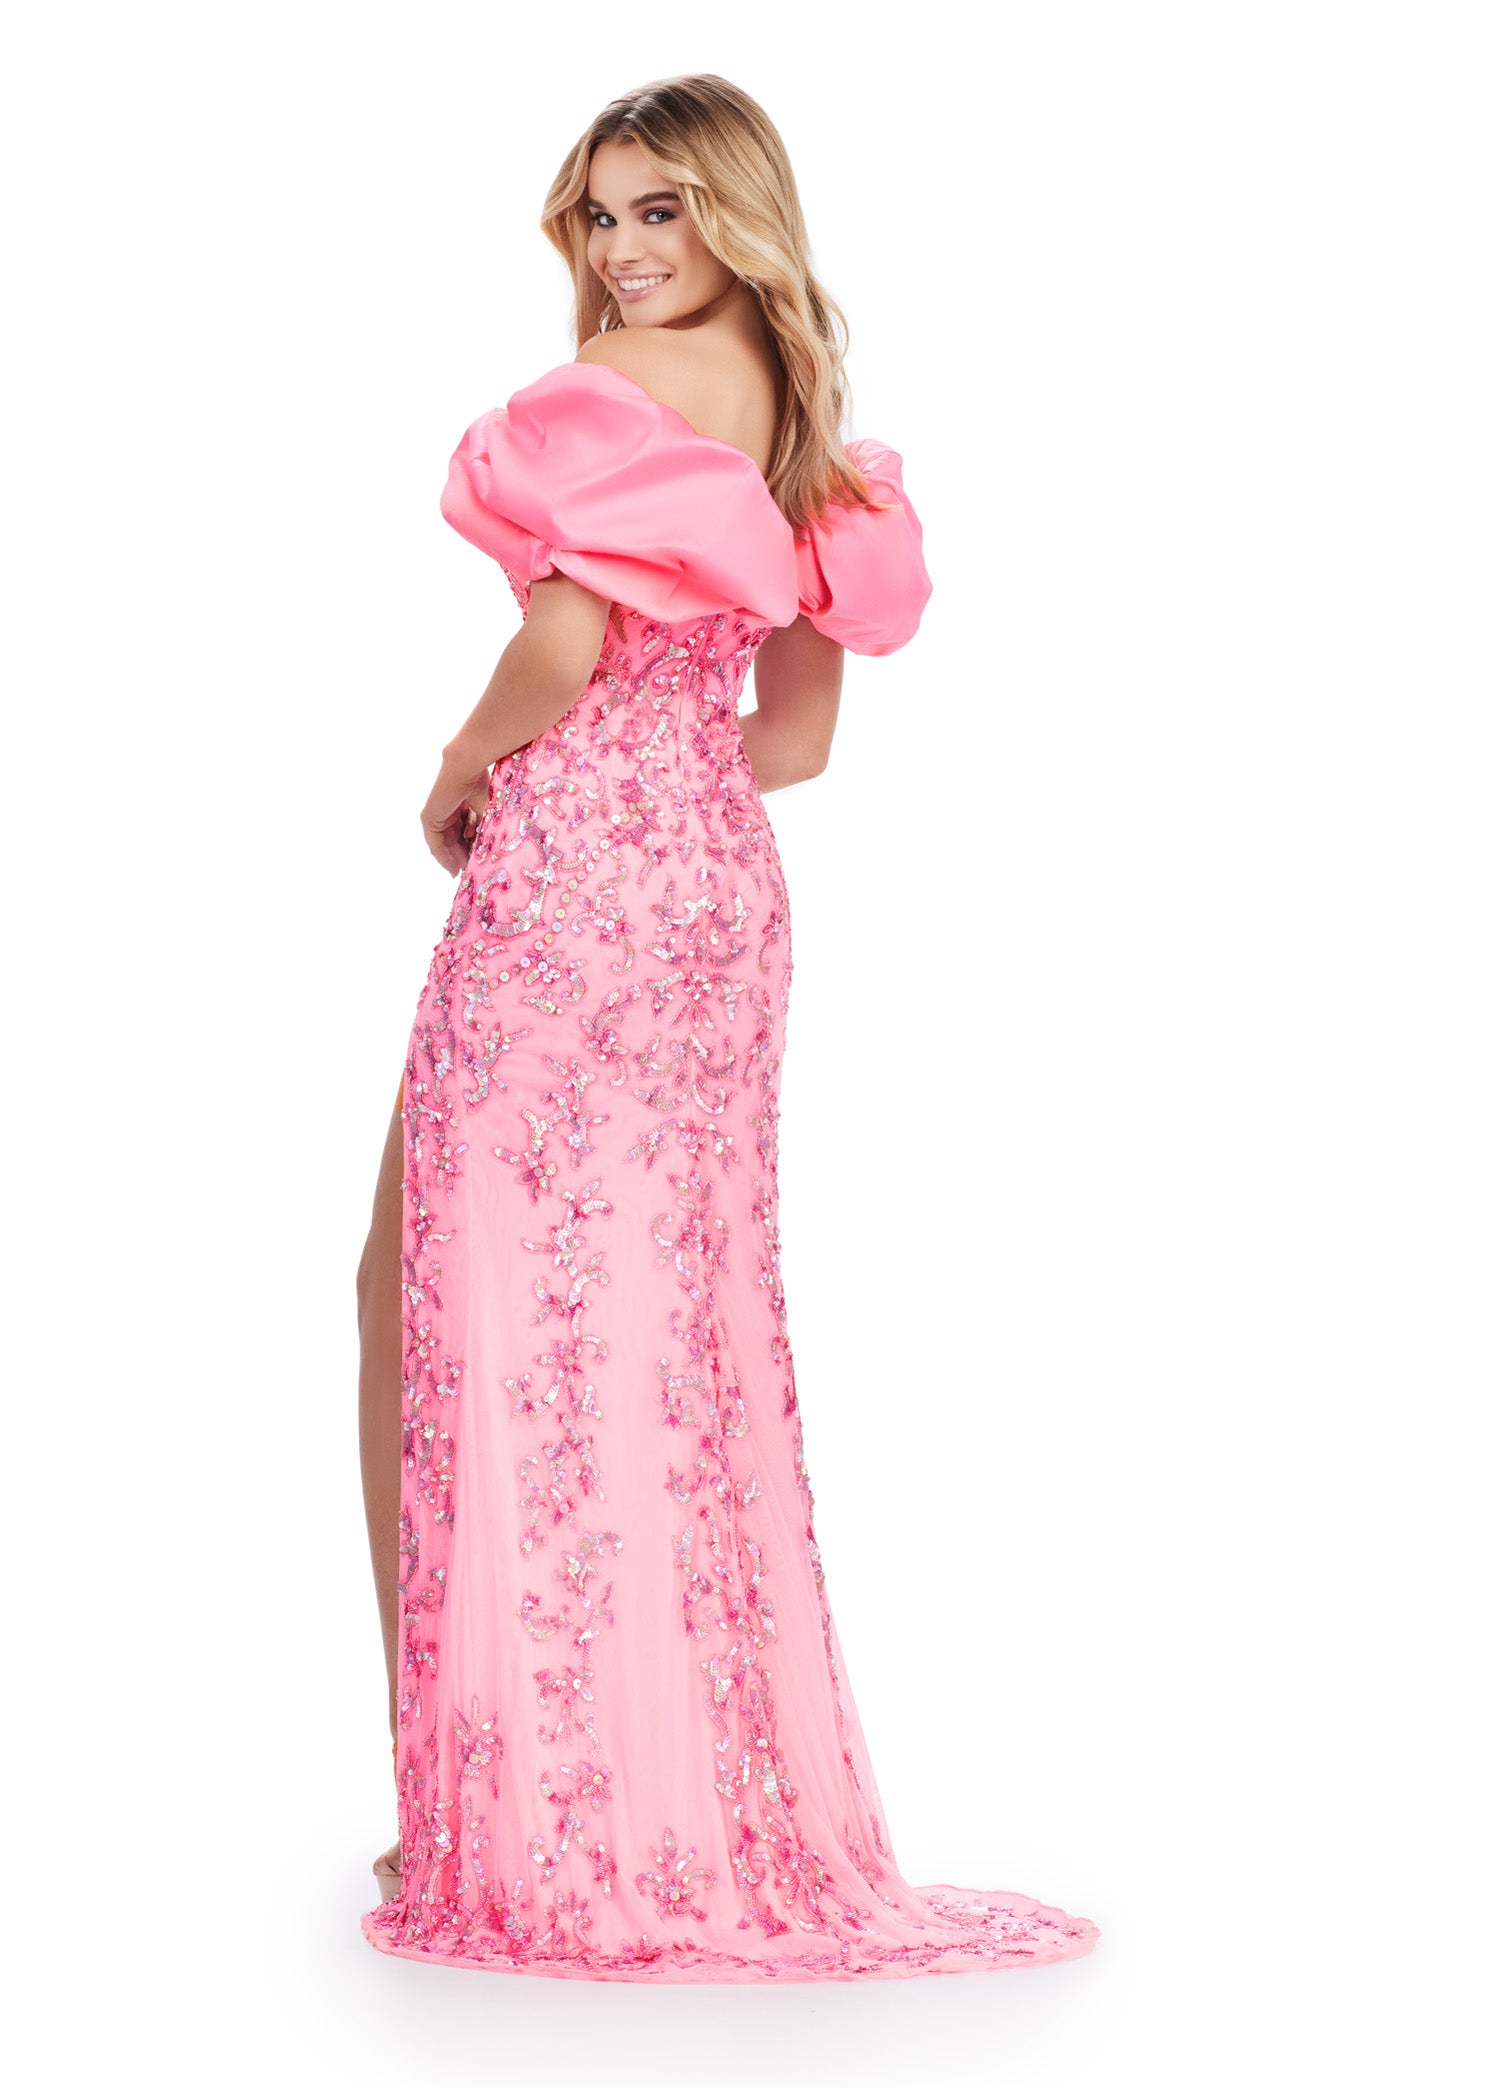 Elevate your elegance with the Ashley Lauren 11581 Long Prom Dress. Featuring a strapless neckline and fully beaded design, this gown exudes a formal and luxurious feel. The oversized taffeta ruffle adds volume and movement, making it perfect for pageants and special occasions. Make a statement and feel confident in this stunning piece. This unique, fully beaded gown features an oversized taffeta ruffle that takes this look to the next level.